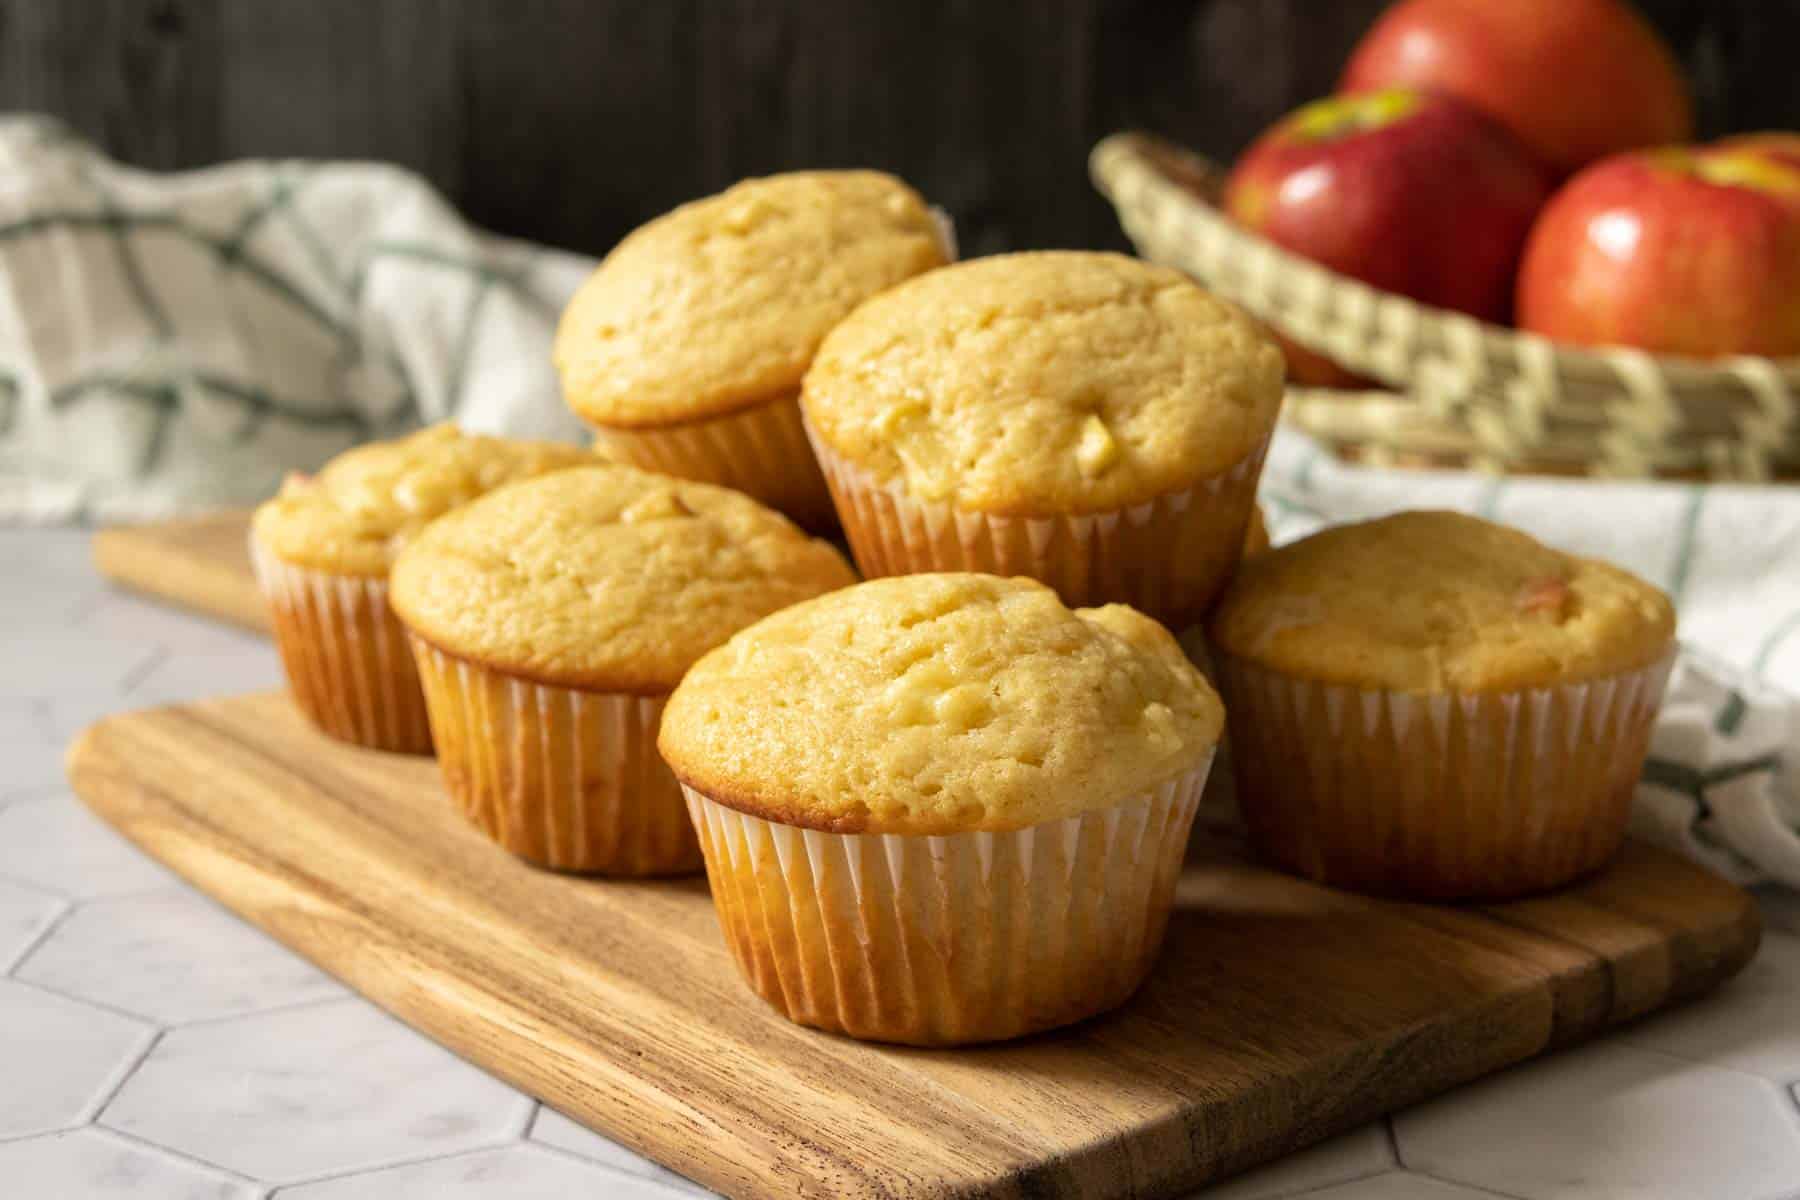 Apple muffins on a wooden cutting board.